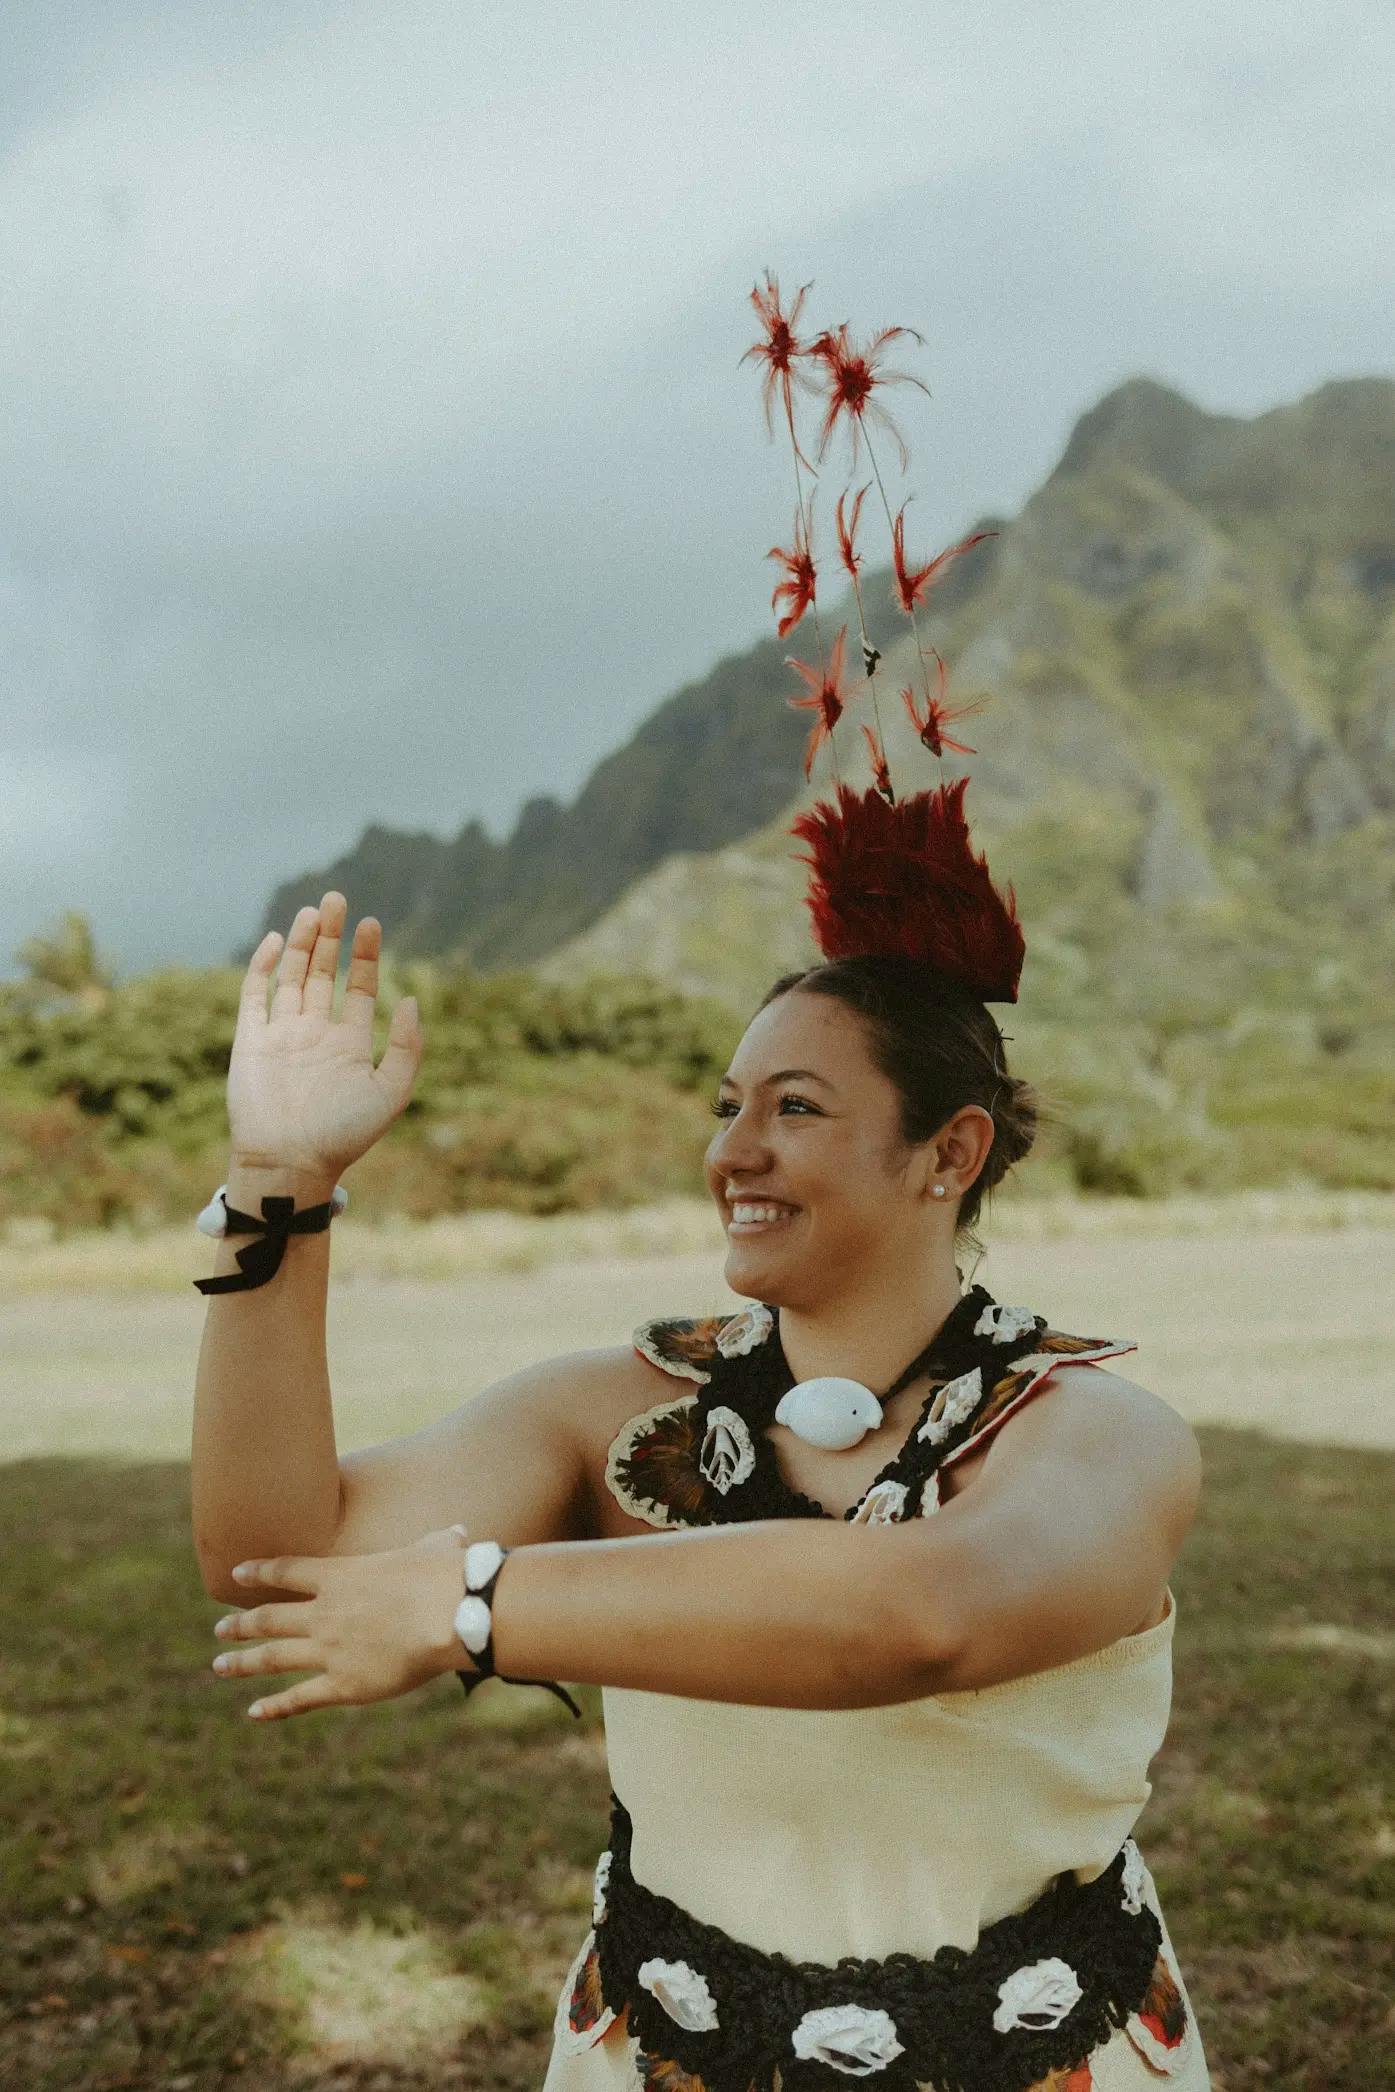 Mele proudly wearing traditional Tongan attire showcasing her love and pride in her heritage